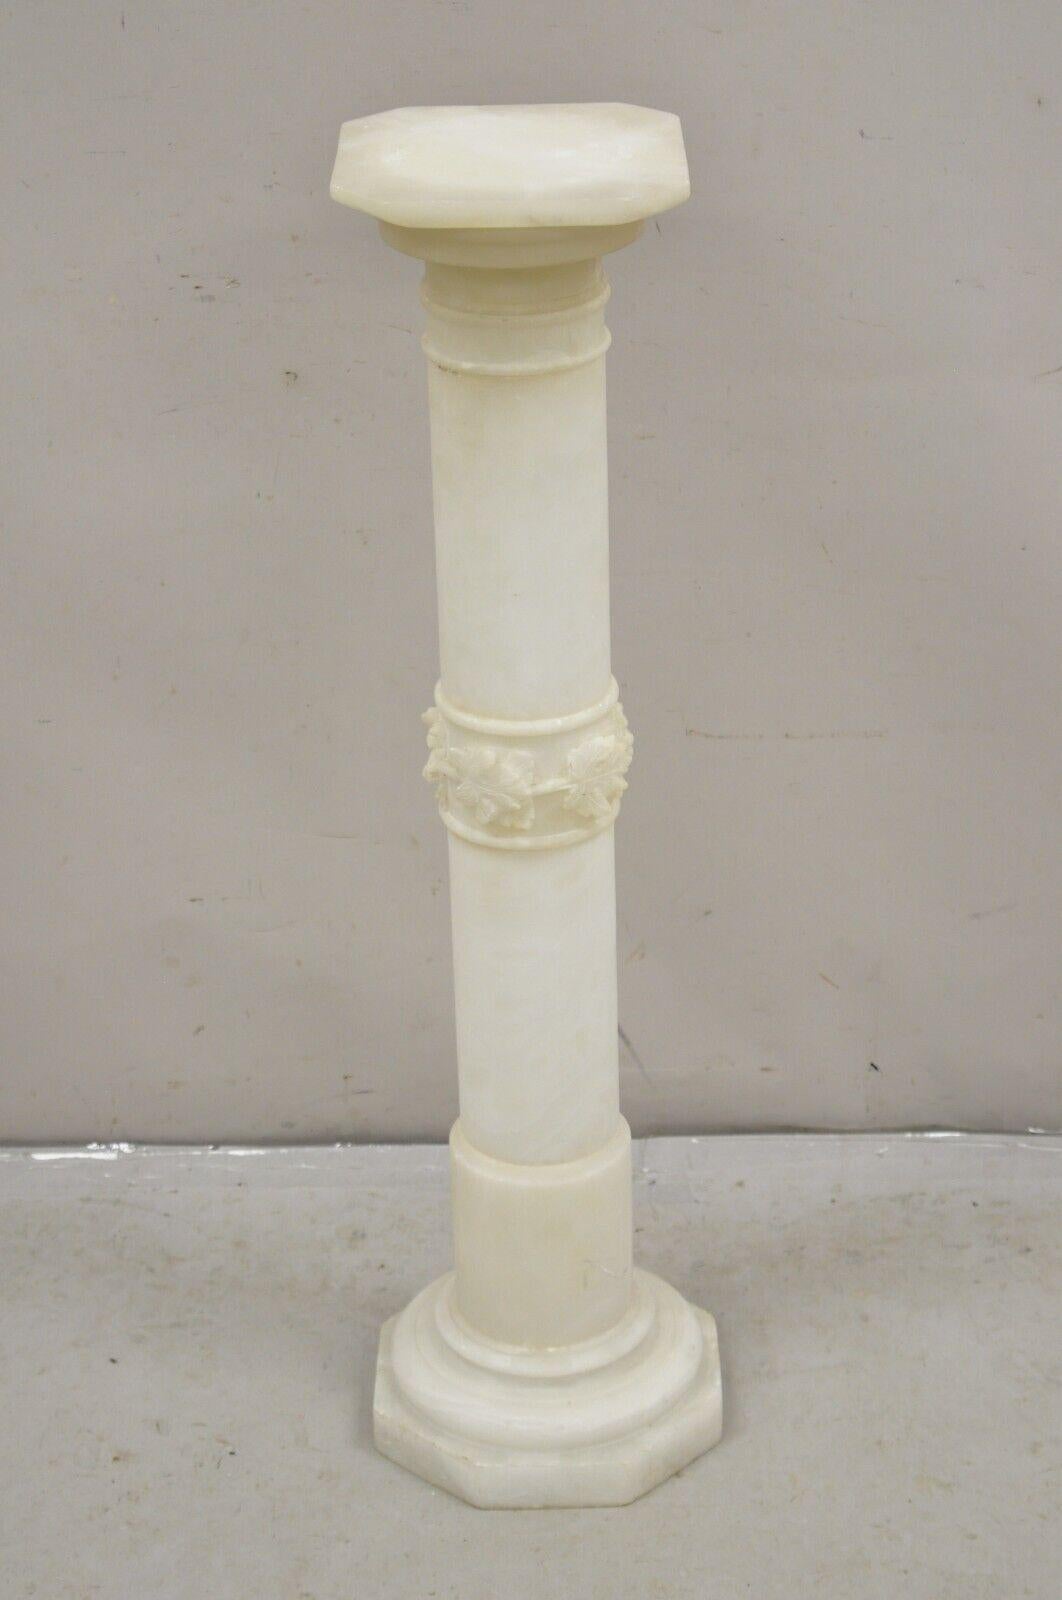 Antique Italian Carved Alabaster Maple Leaf Classical Pedestal Column Stand. Circa Early 1900s.
Measurements: 
39.5